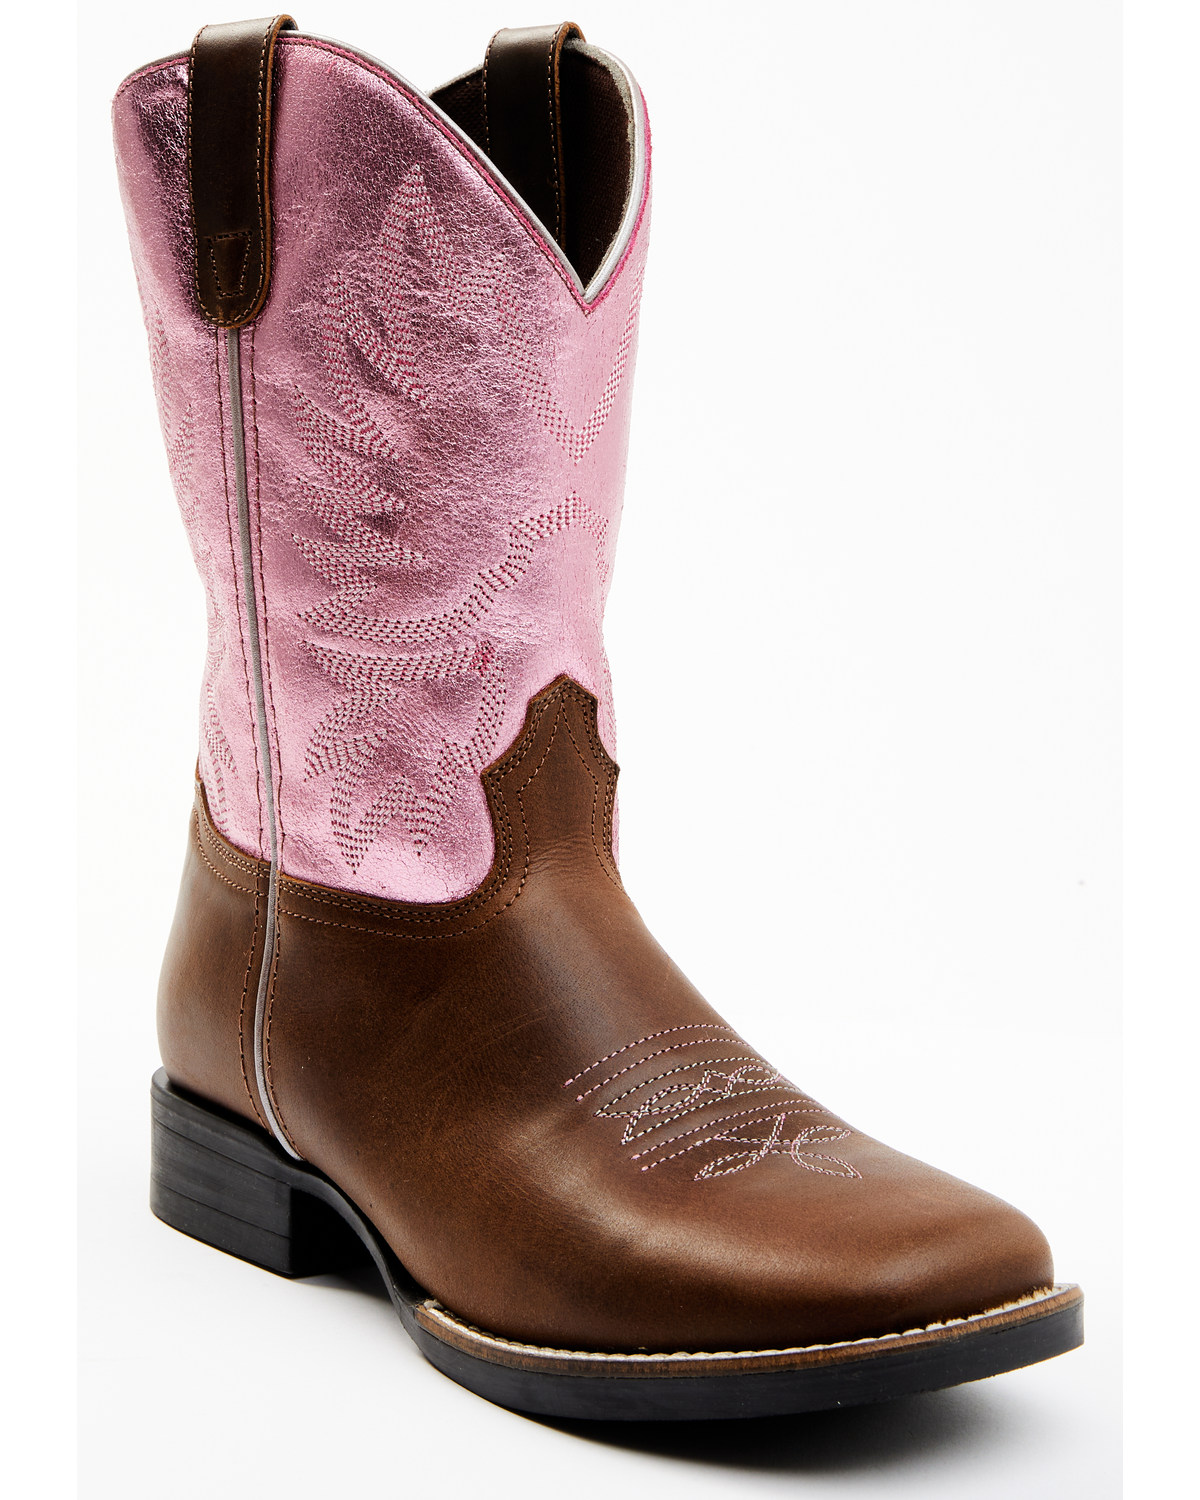 Shyanne Girls' Miss Molly Western Boots - Broad Square Toe